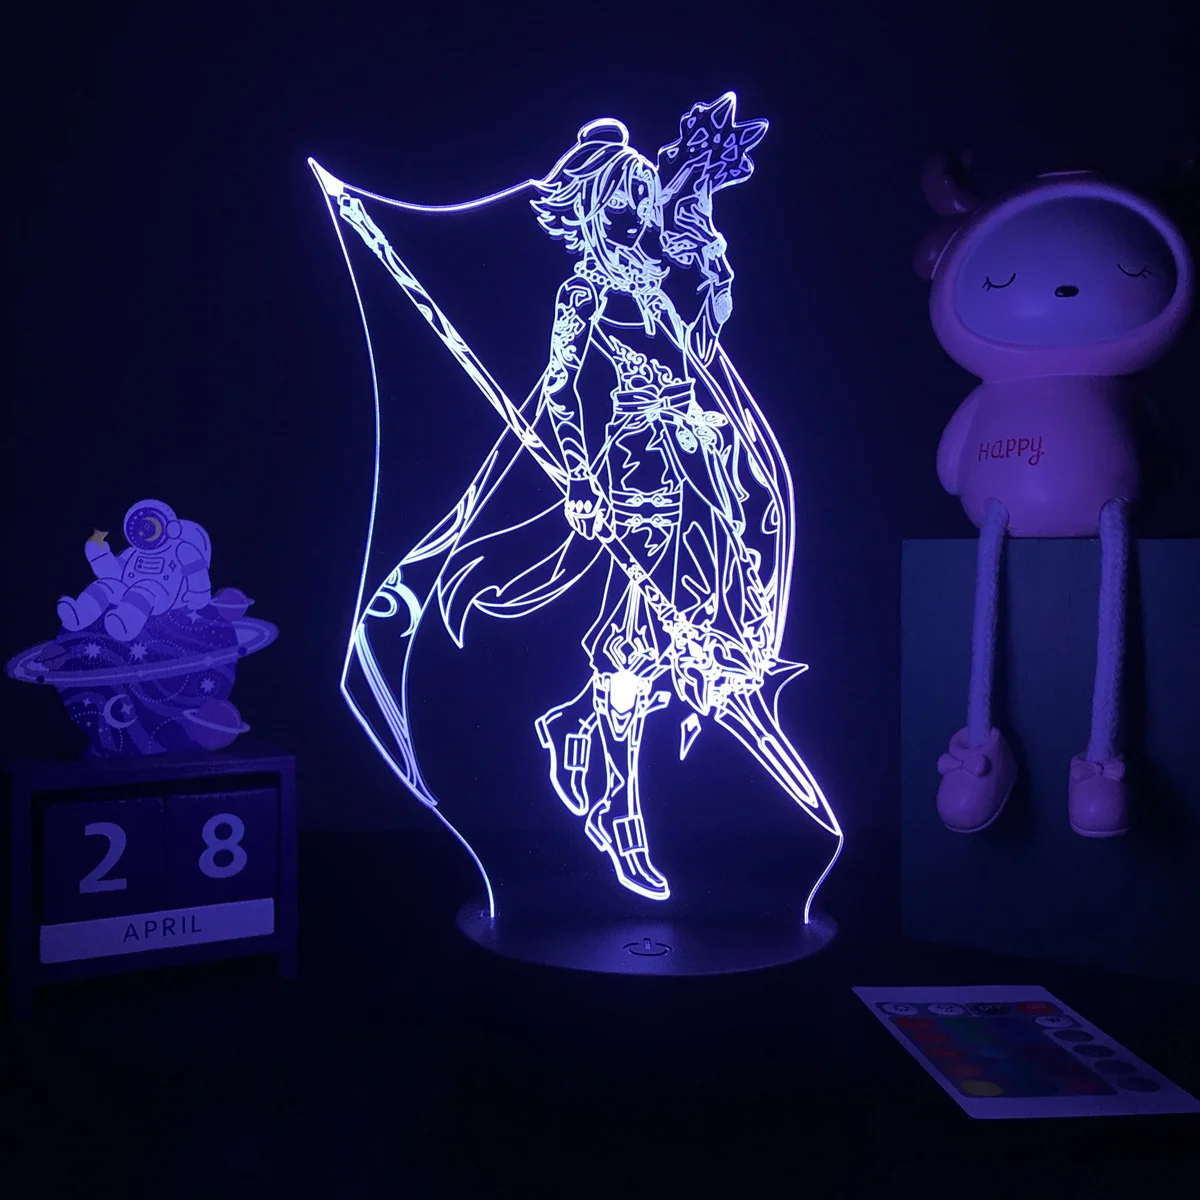 best night light Genshin Impact 3D LED Nightlight Color Changing Usb Battery Powered Usb Lamp Ganyu Mona Game Figure For Room Decor Unique Gift mushroom night light Night Lights